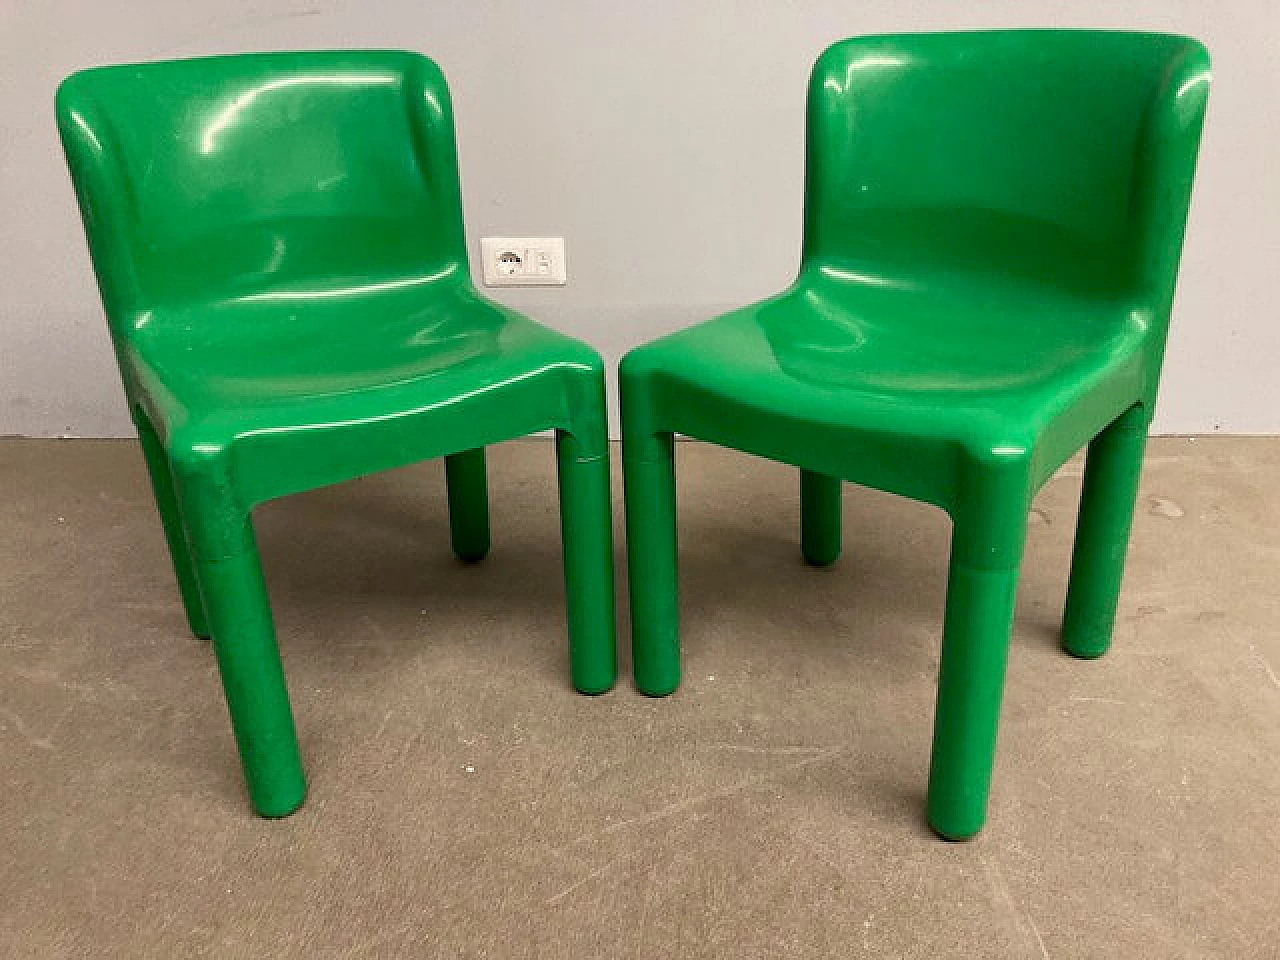 Pair of 4875 green plastic chairs by Carlo Bartoli for Kartell, 1970s 1